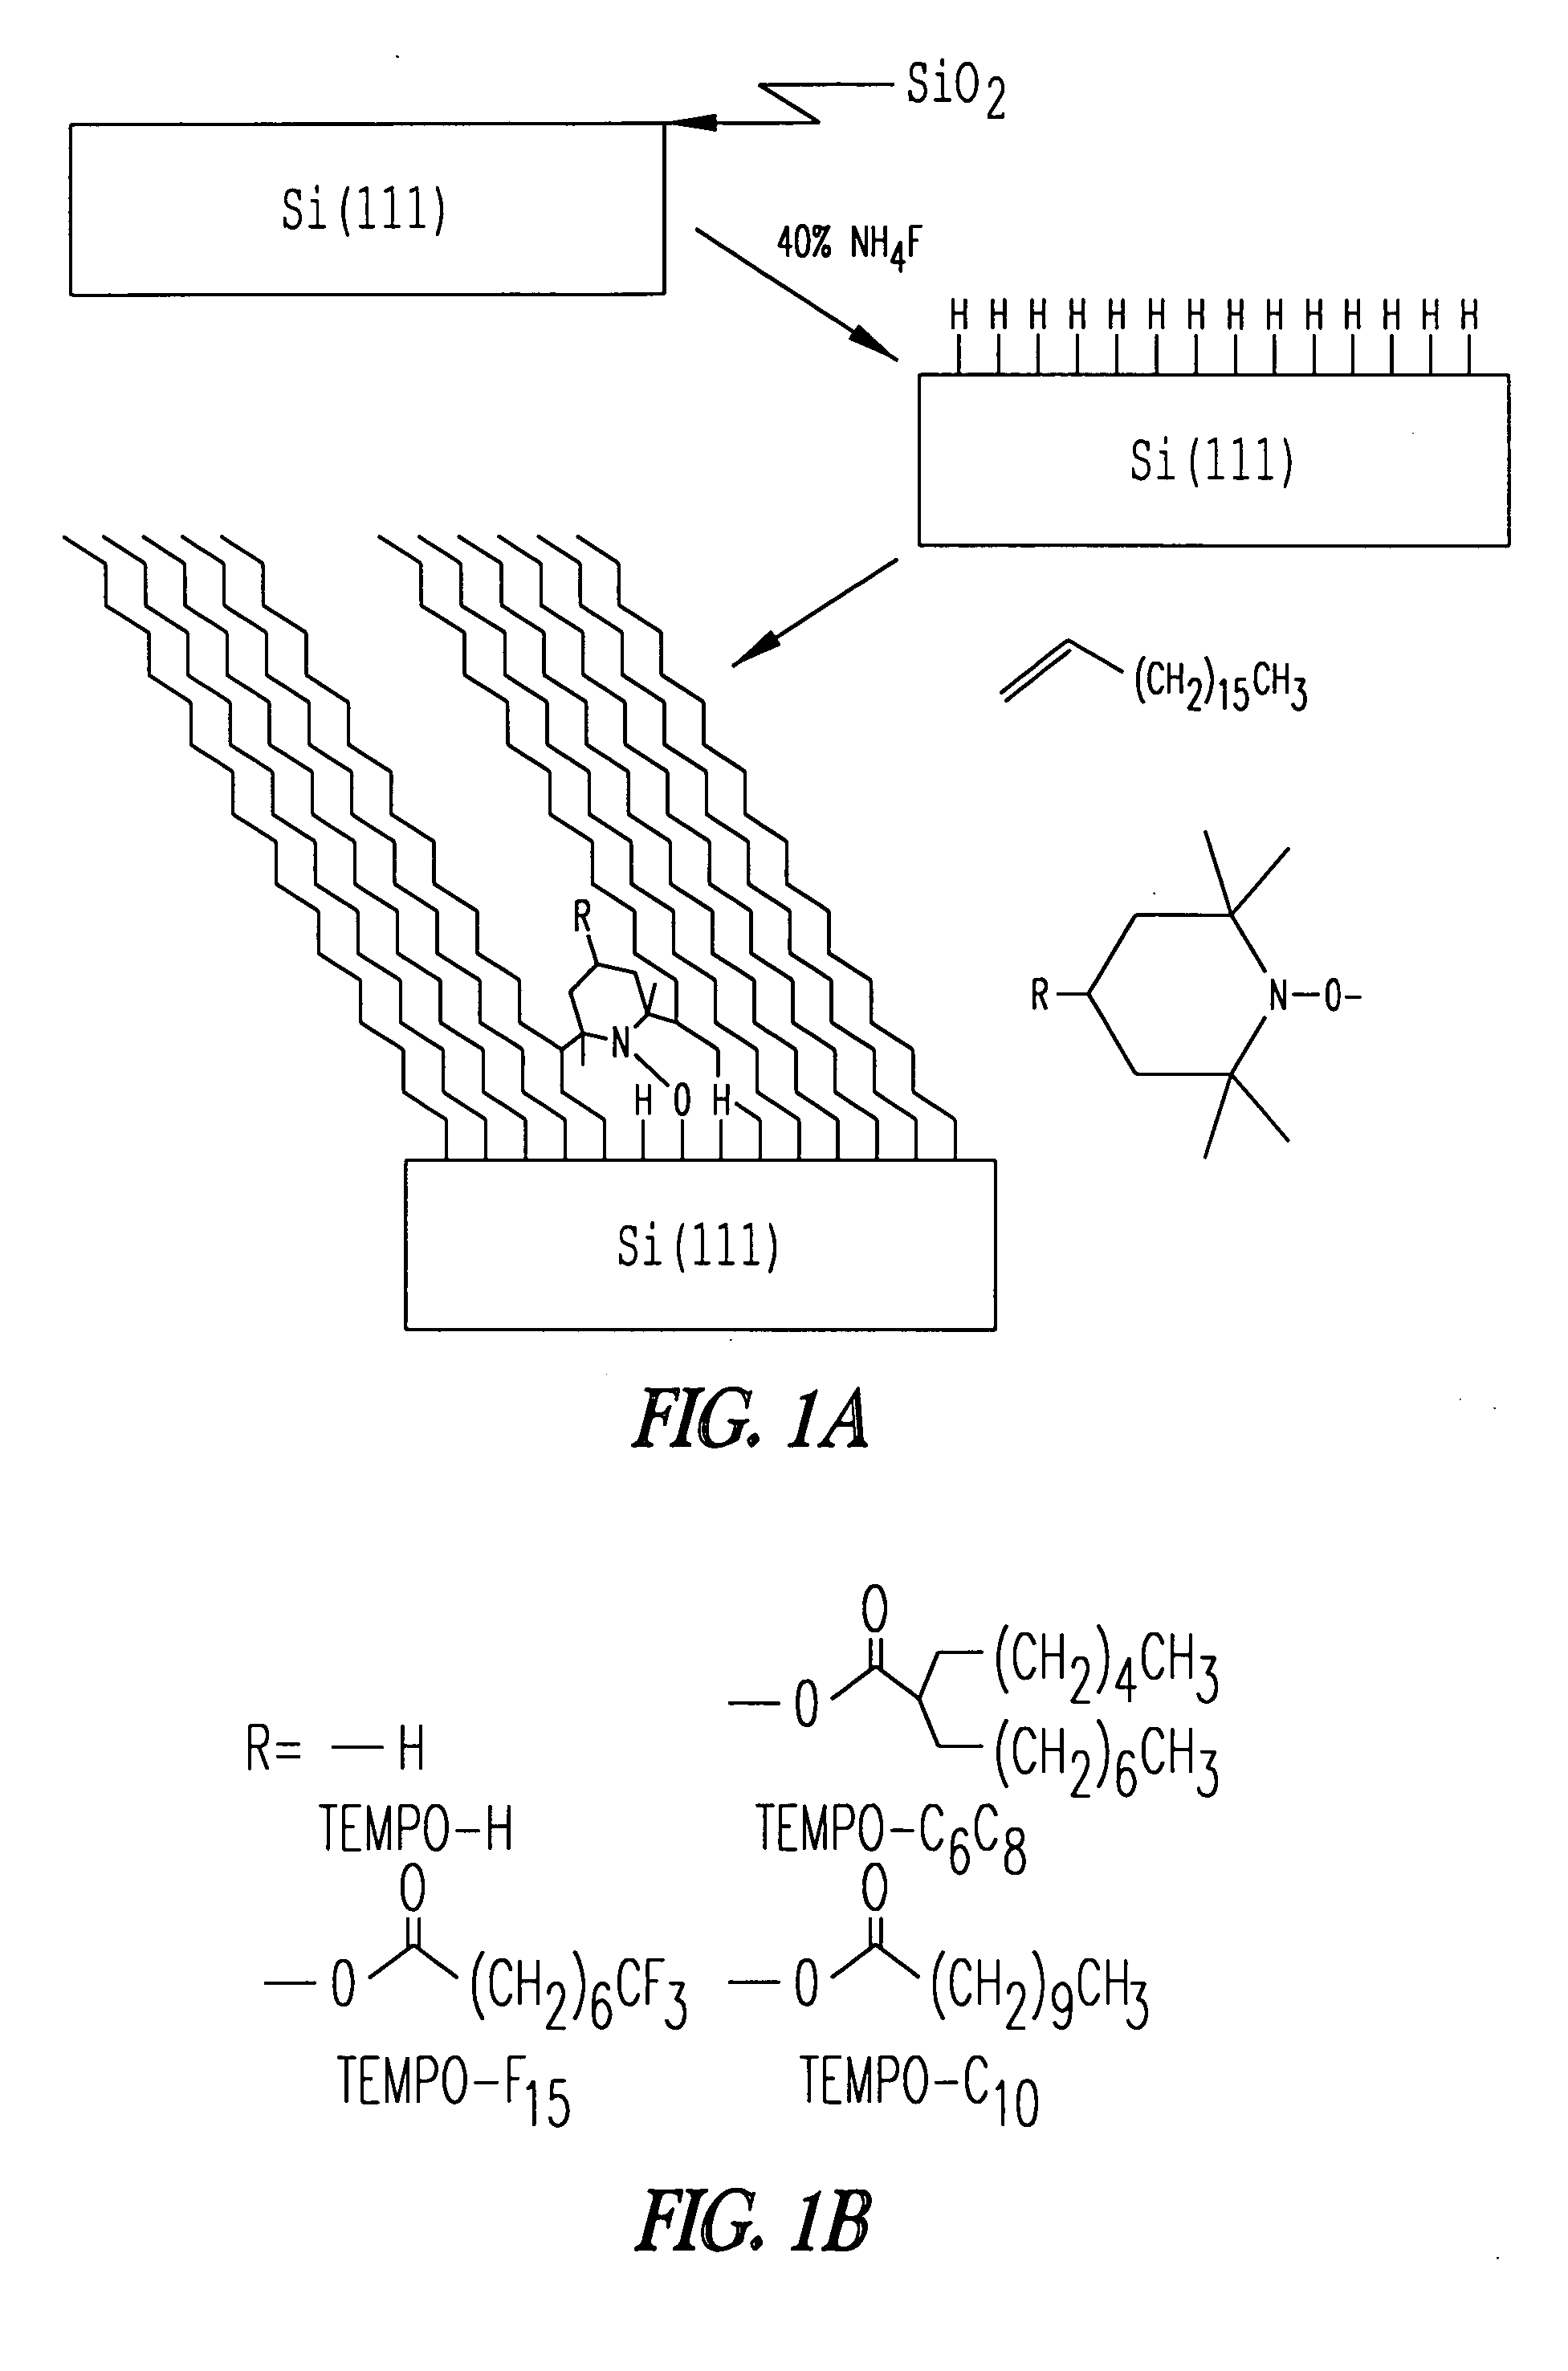 Mild methods for generating patterned silicon surfaces